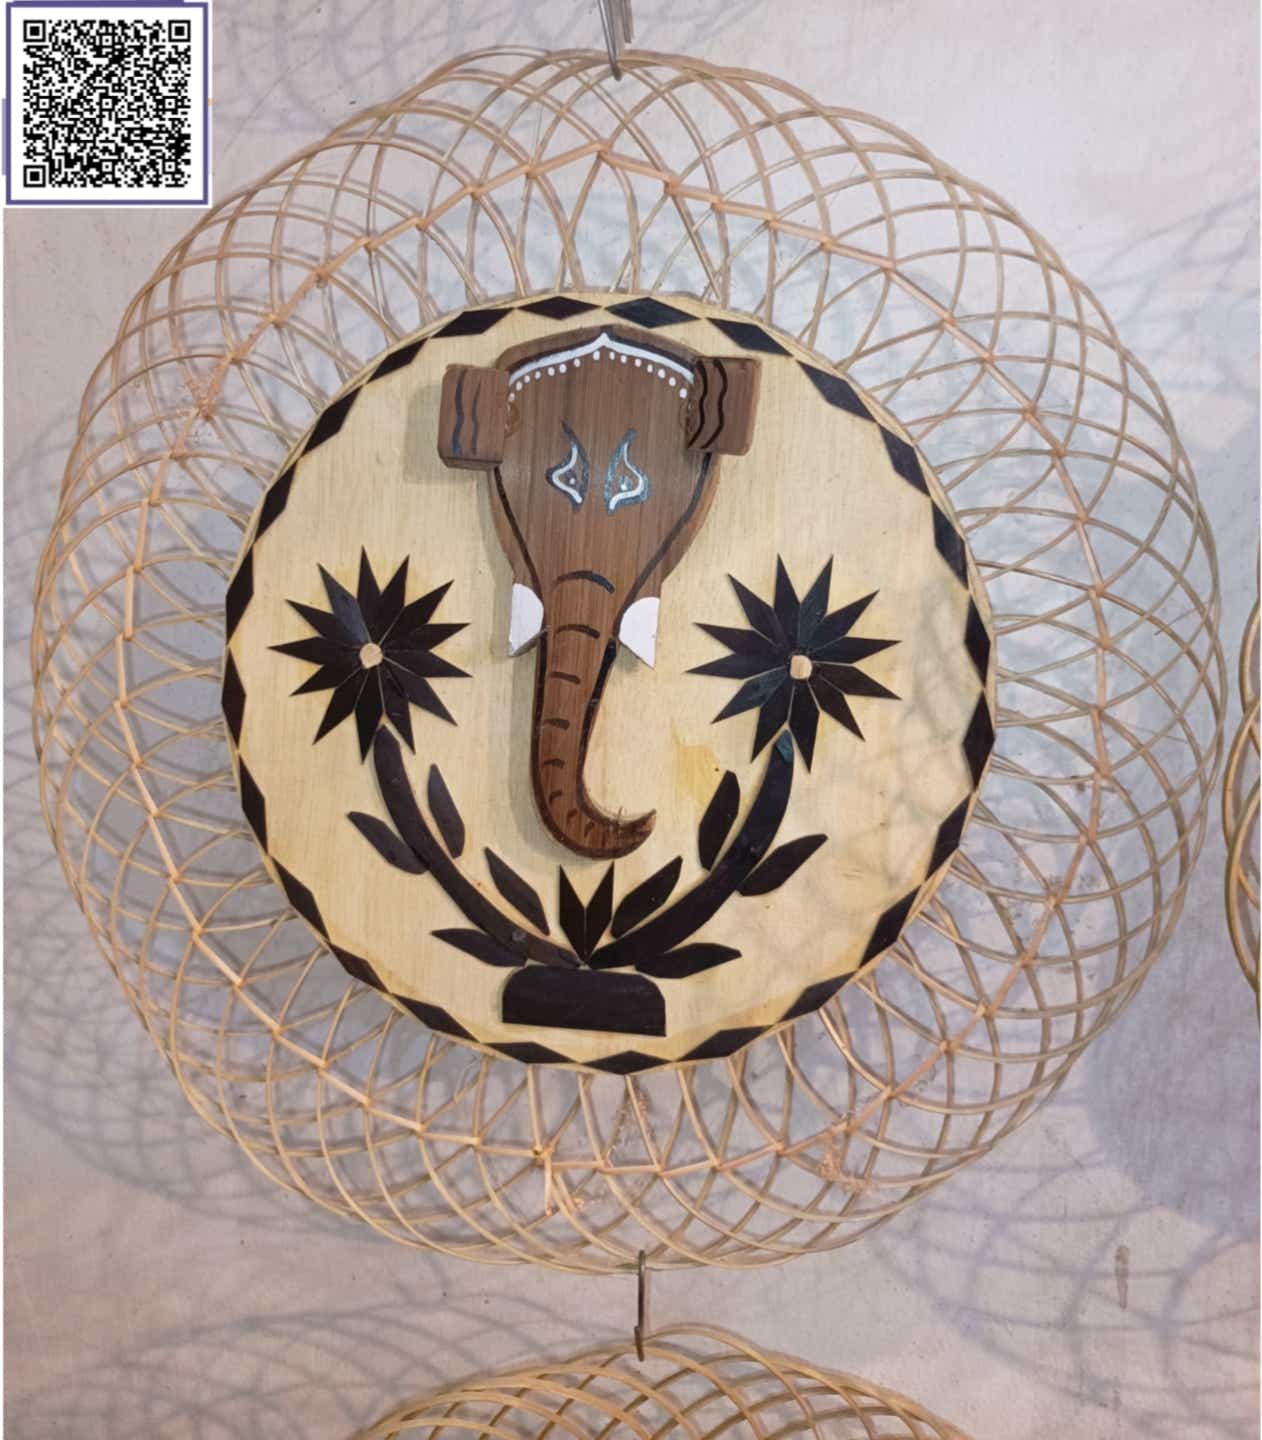 Wall hanging unique wooden Shree Ganesh idol in circle style frame